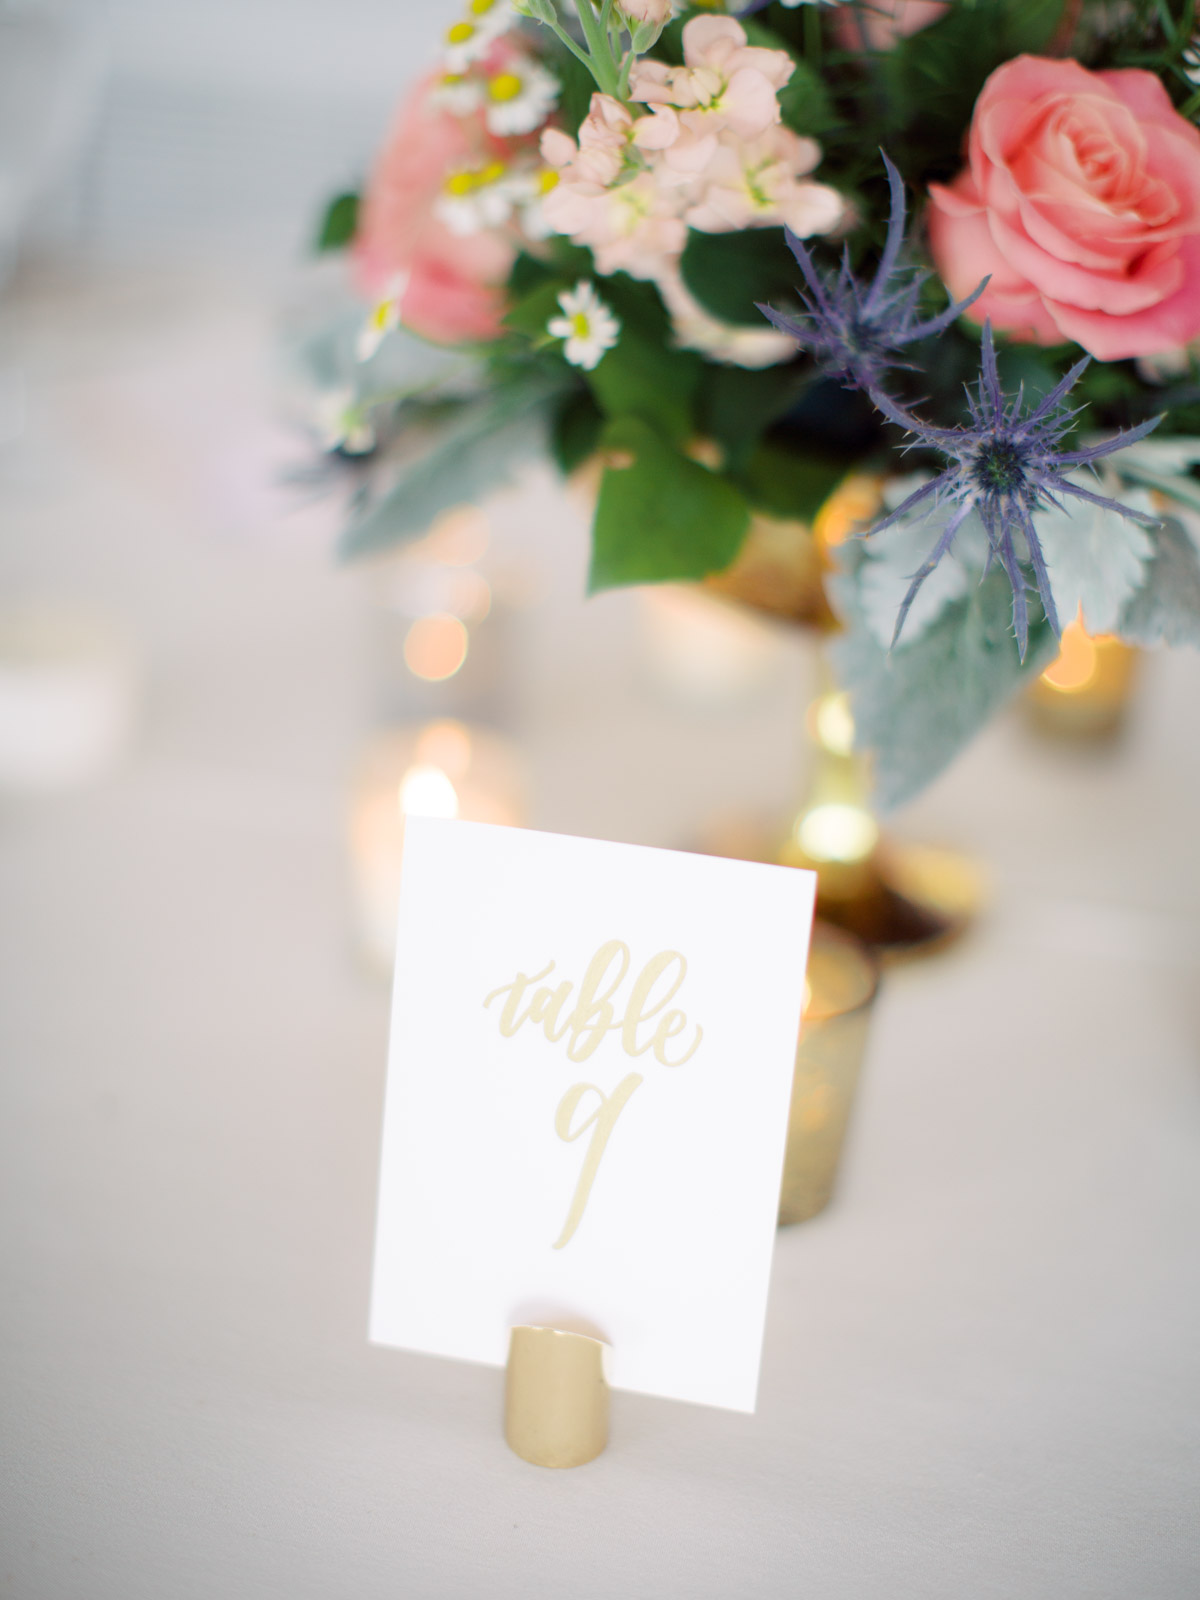 Calligraphy gold foil table numbers for wedding reception at Top of the Town Arlington